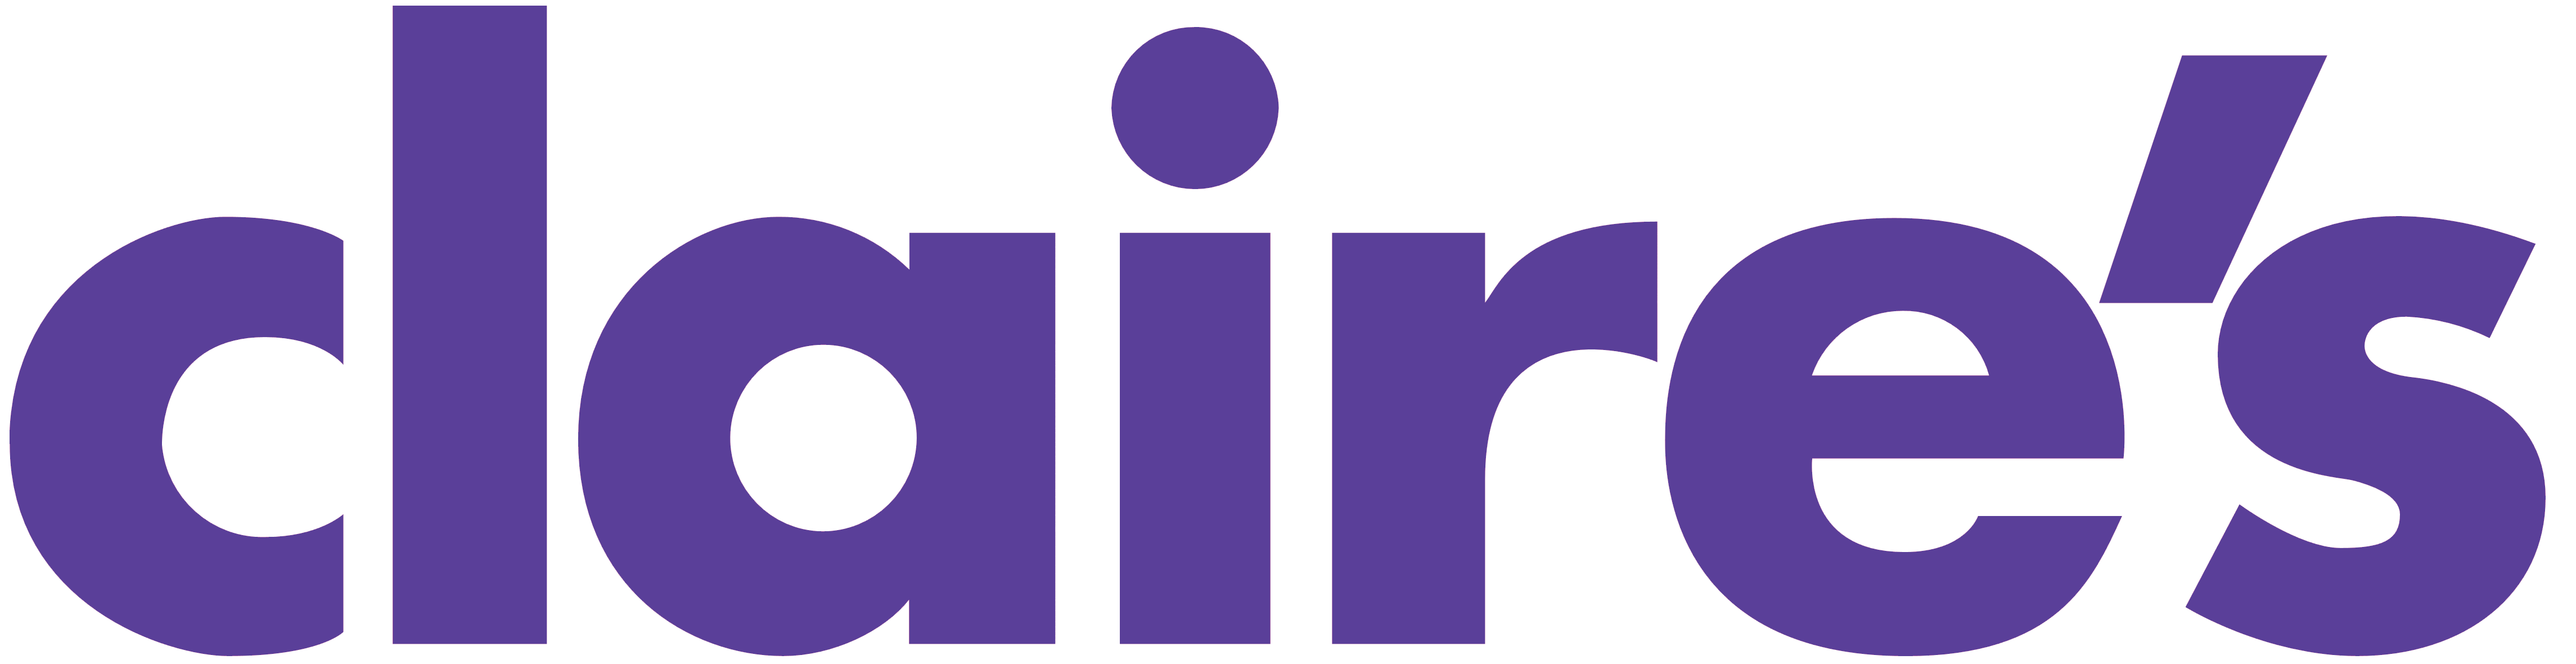 Claire's Logo - Claire's – Logos Download